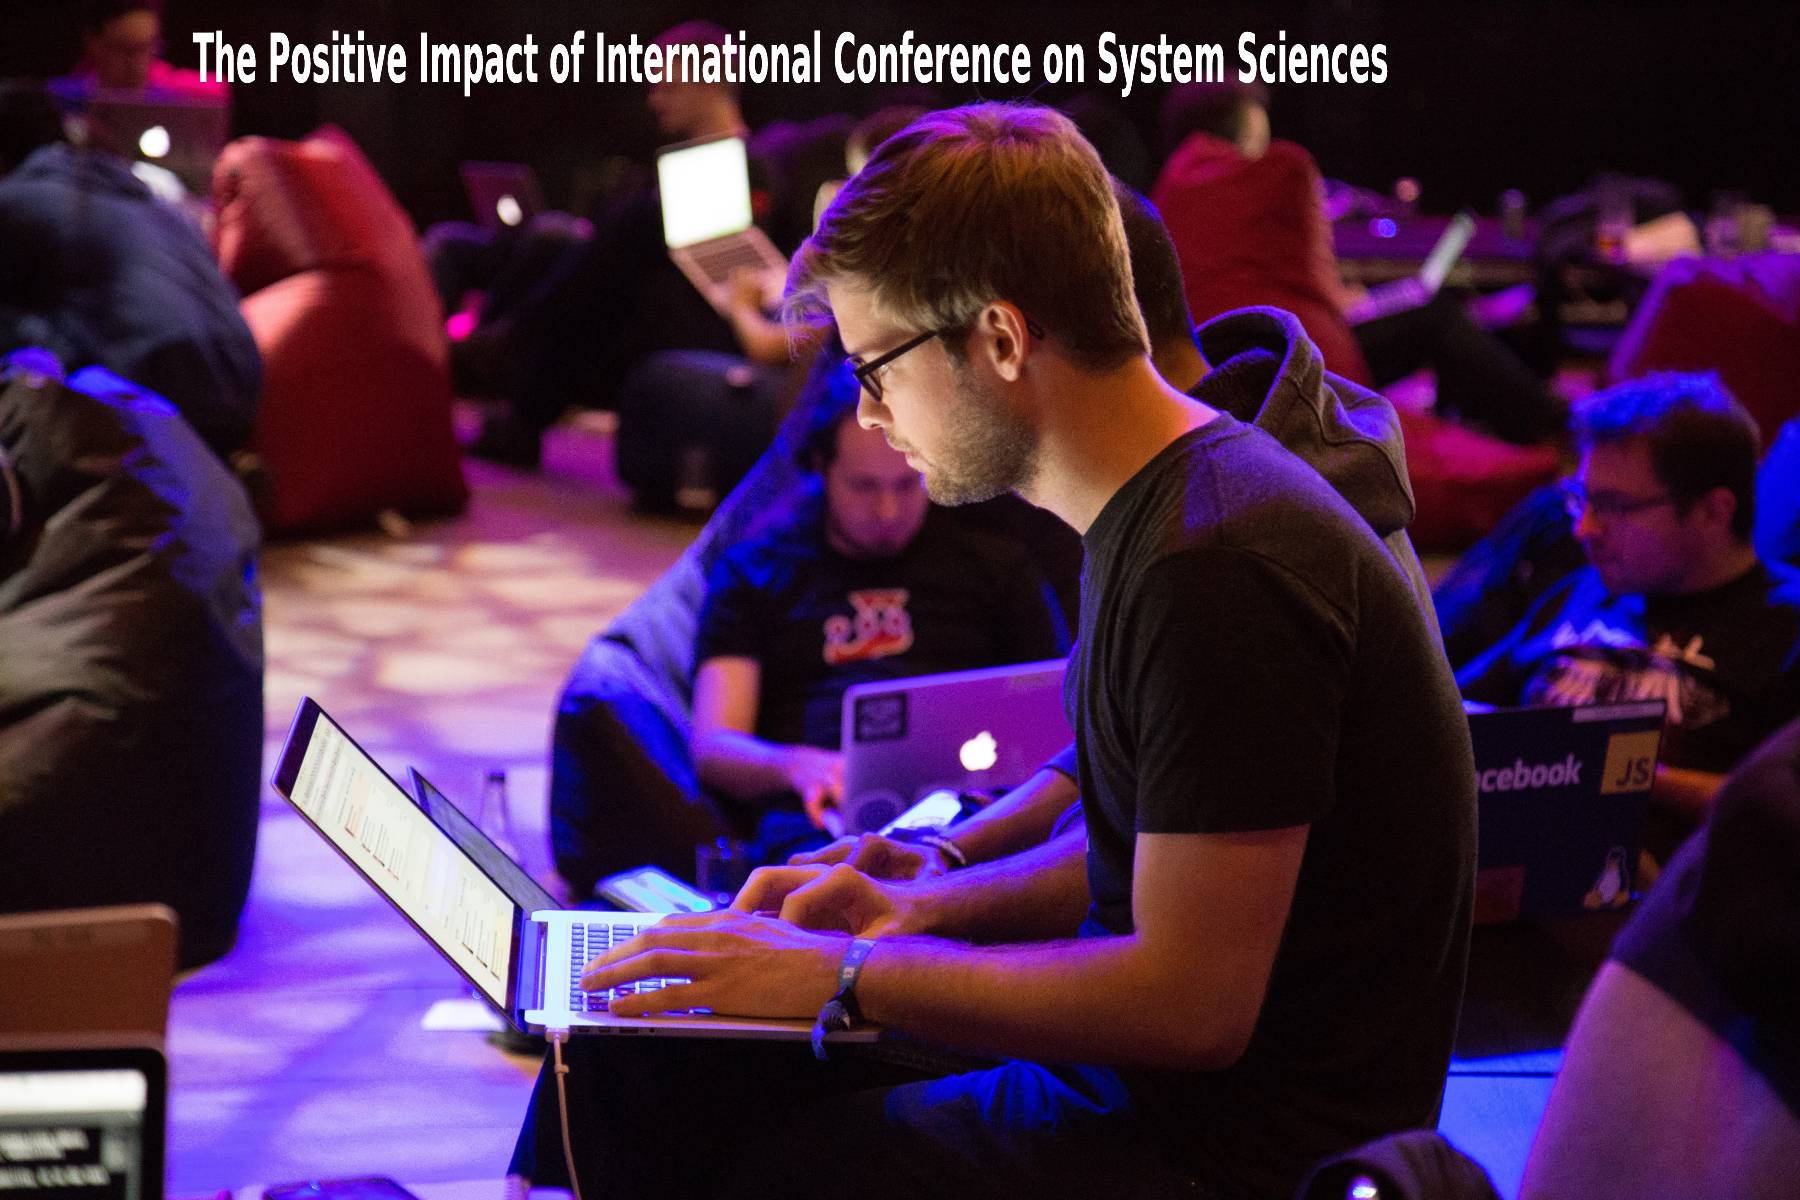 International Conference on System Sciences